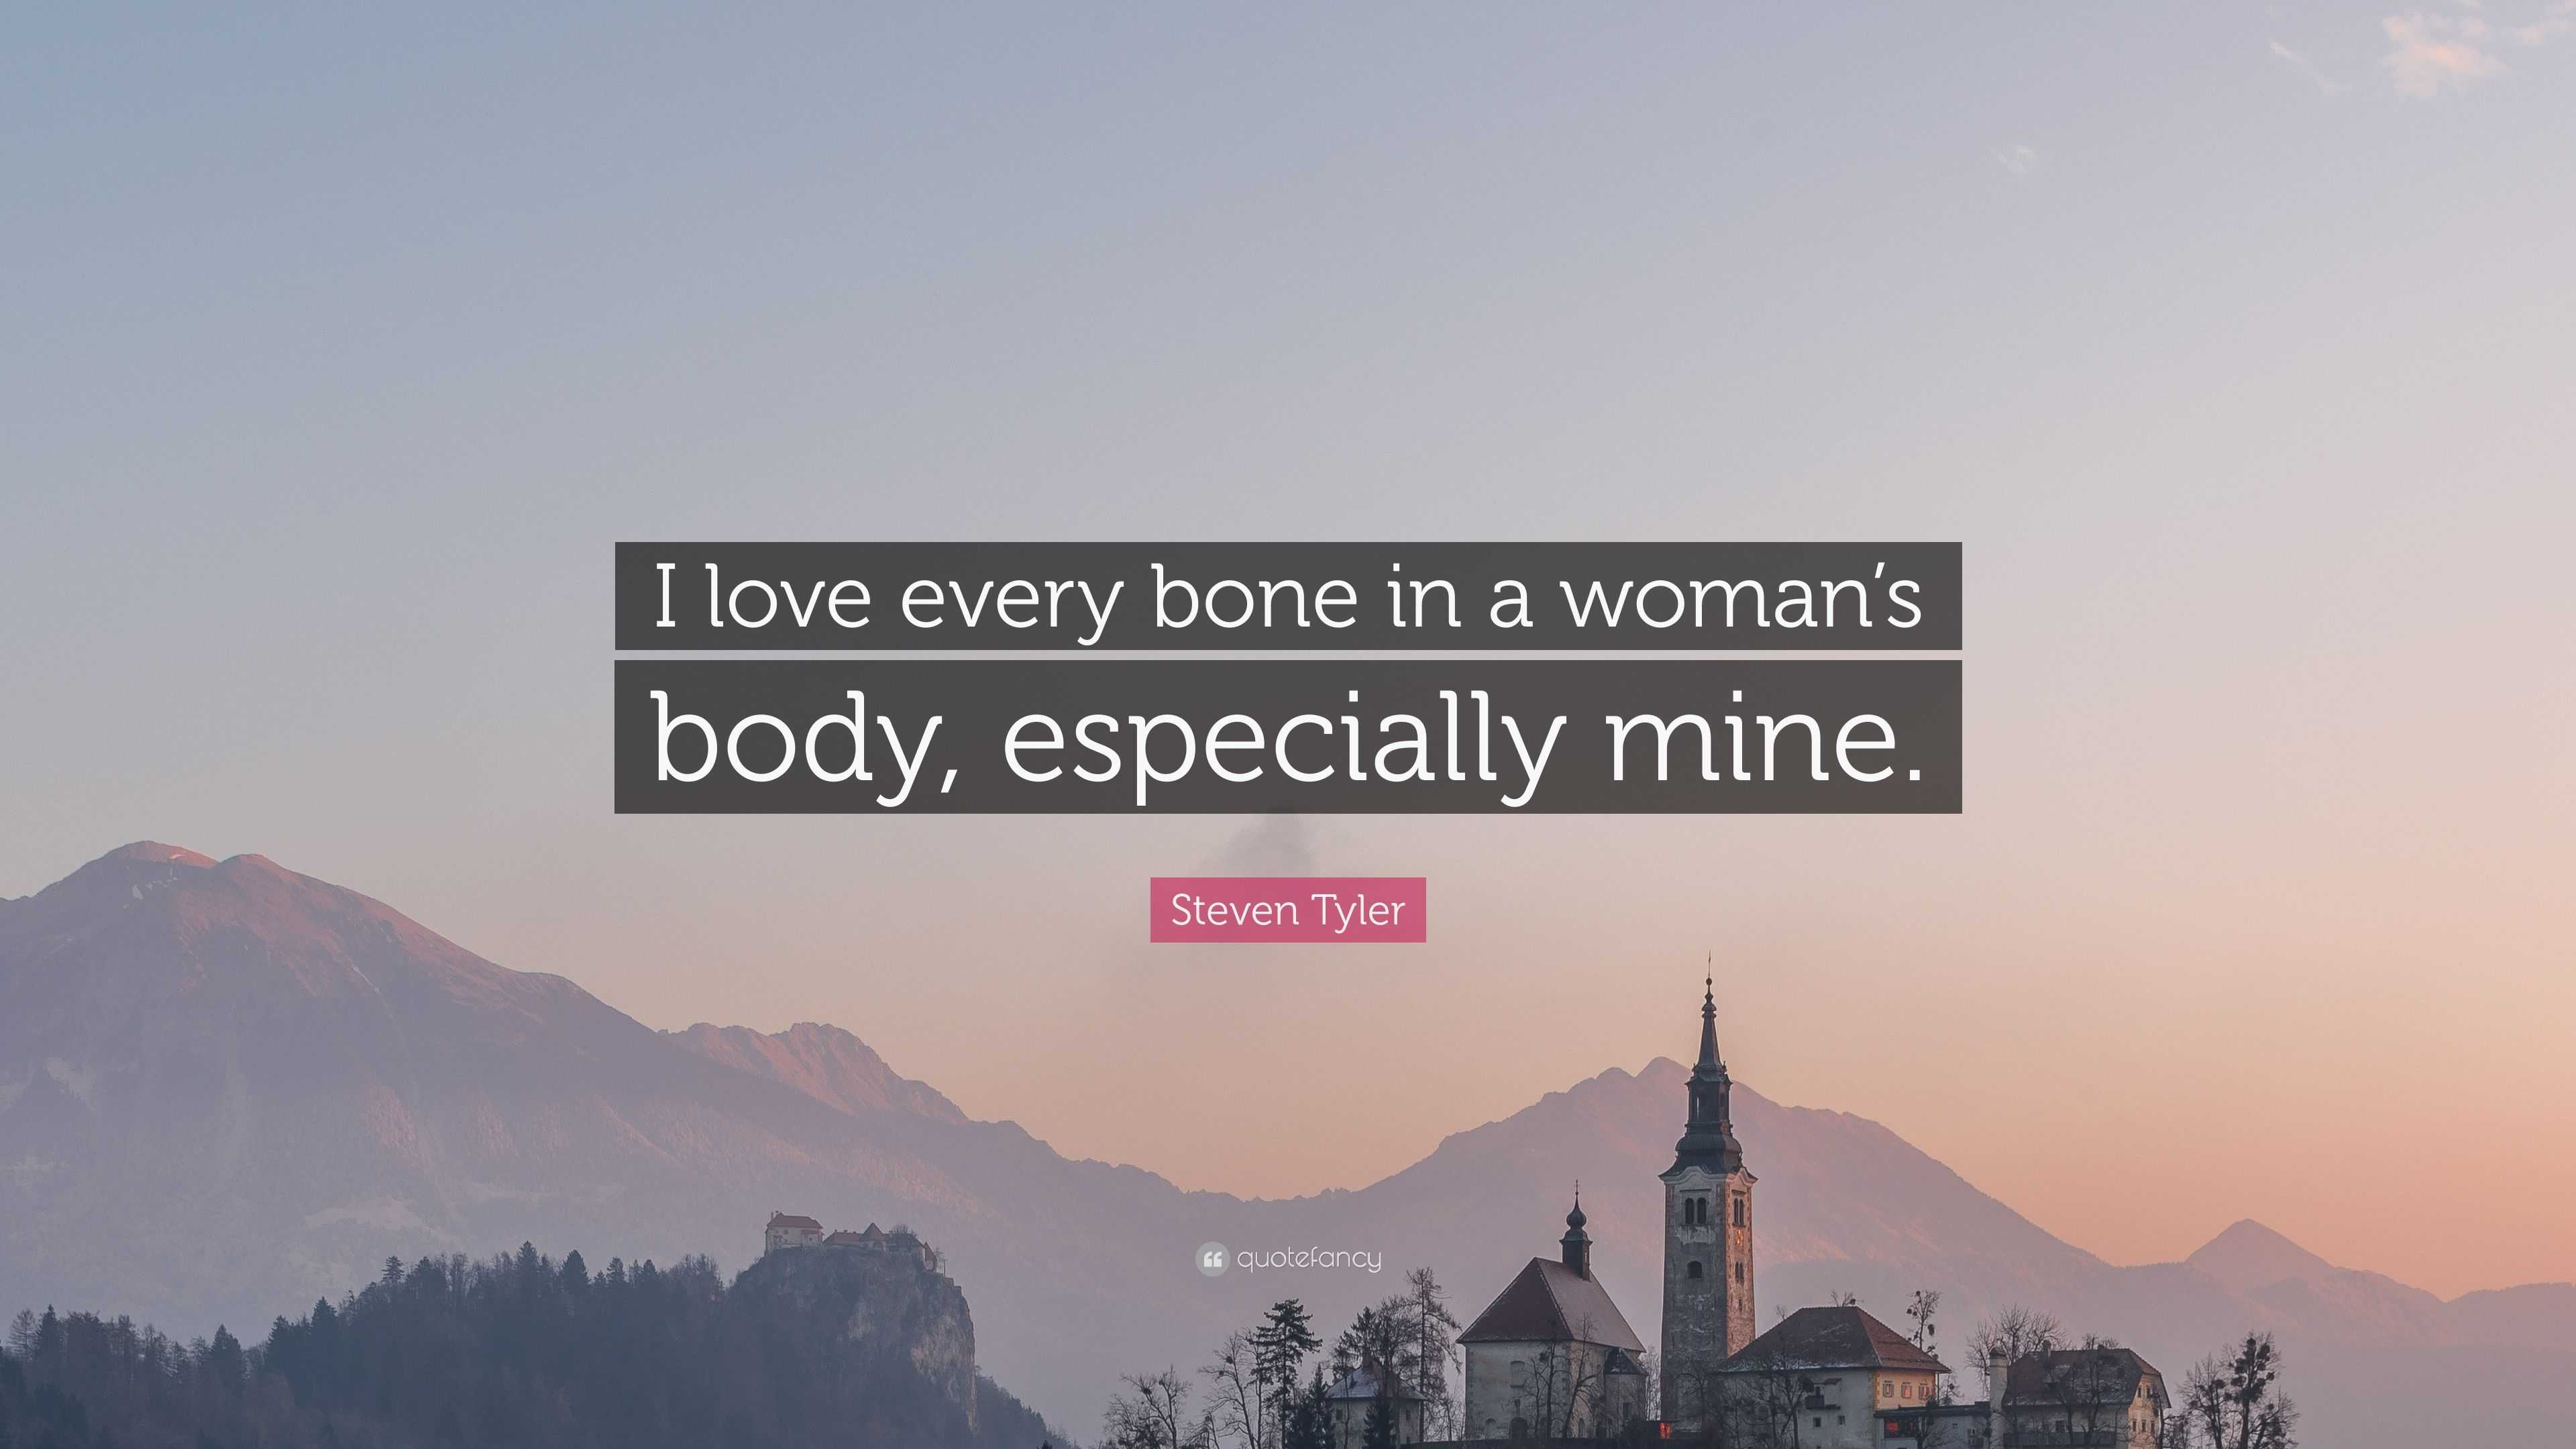 Steven Tyler Quote: “I love every bone in a woman's body